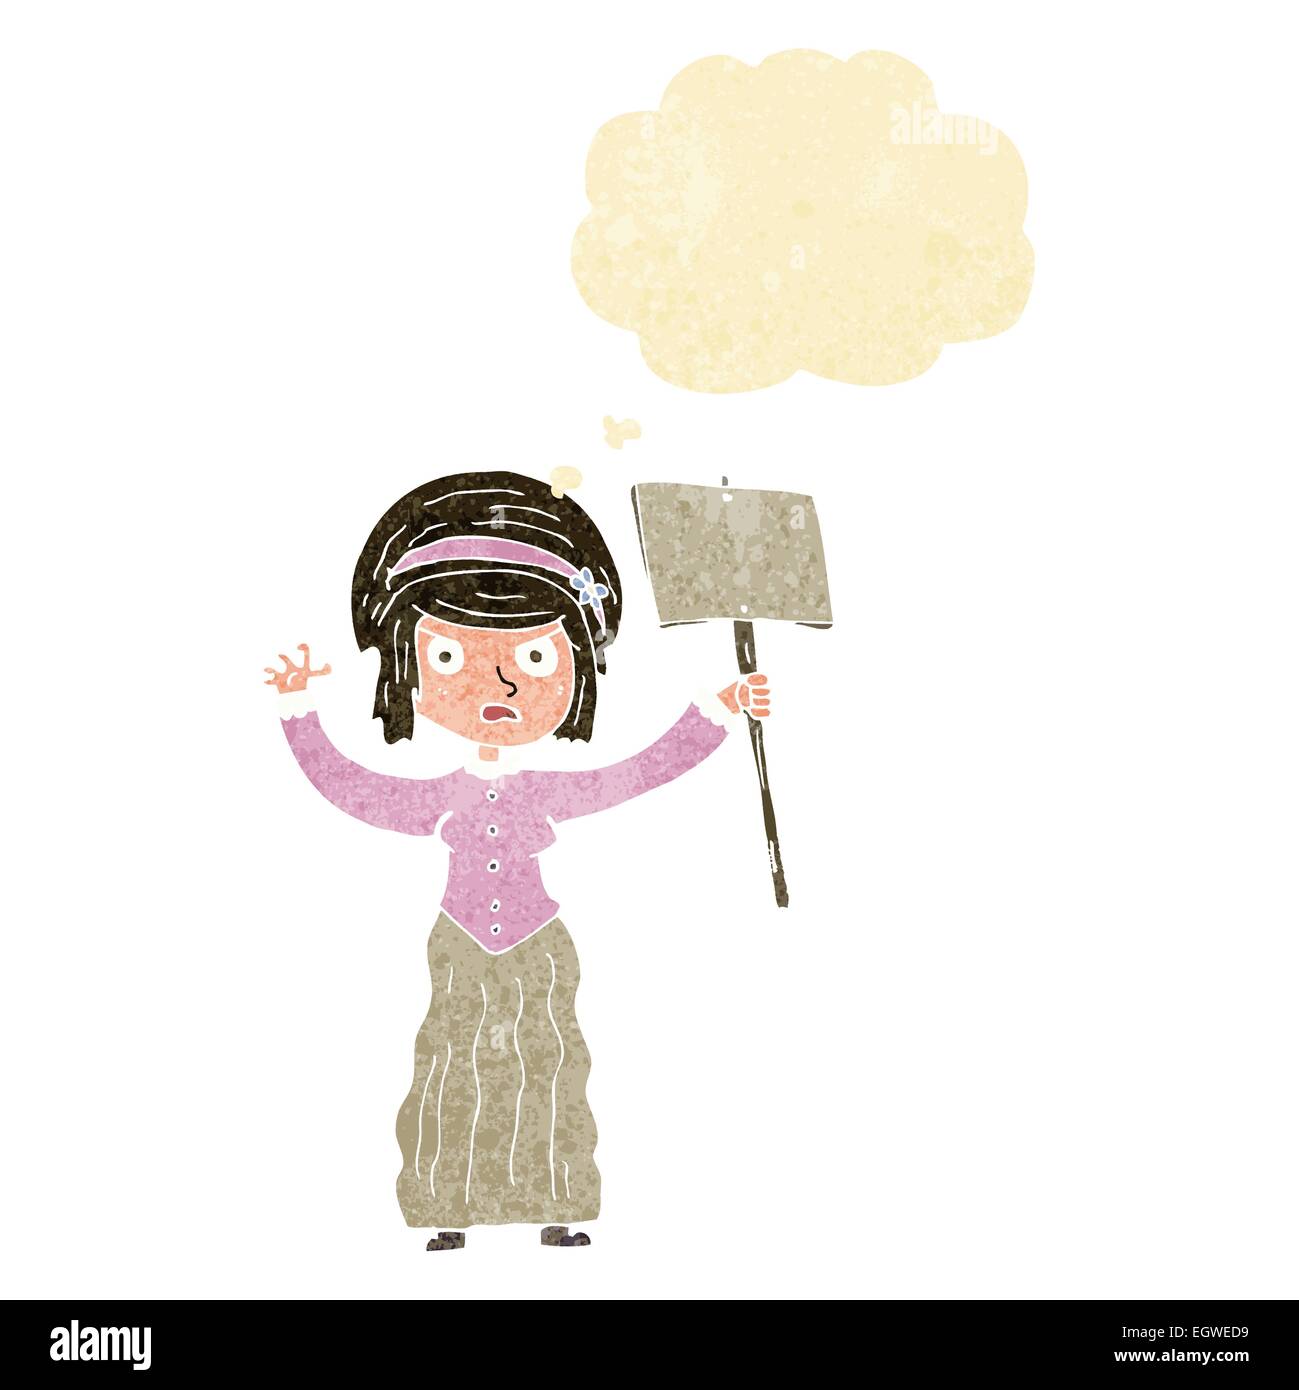 cartoon vicorian woman protesting with thought bubble Stock Vector